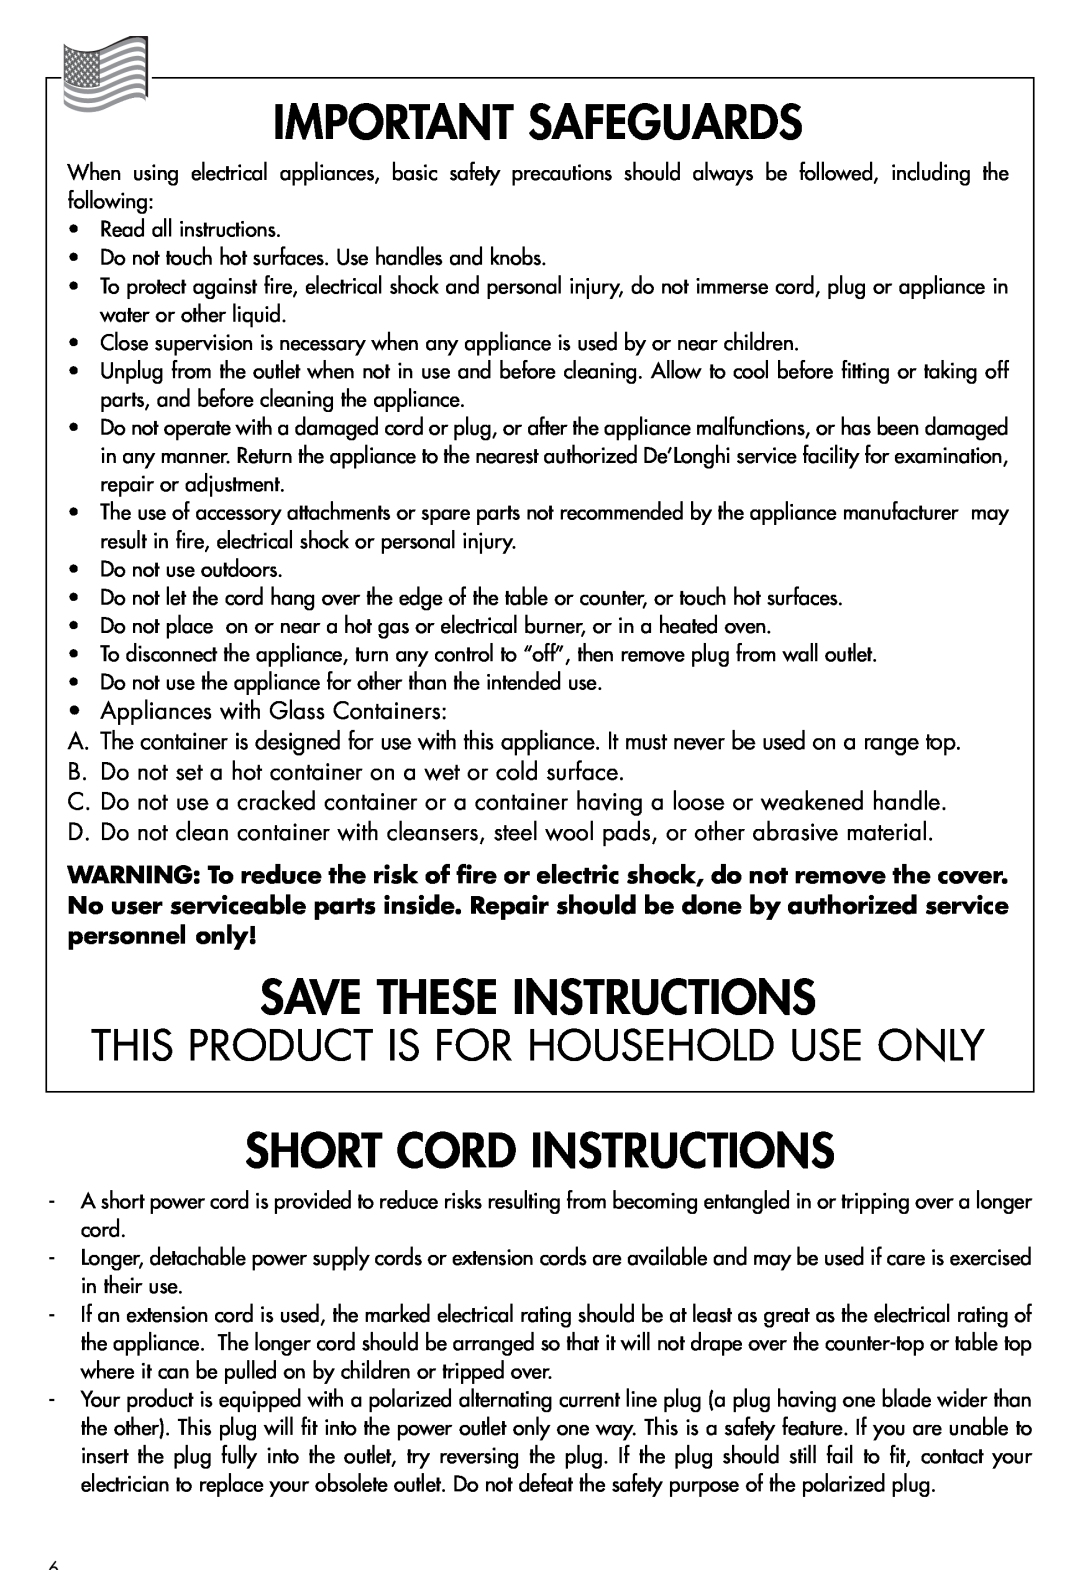 DeLonghi BCO264B manual Important Safeguards, Save These Instructions, Short Cord Instructions 